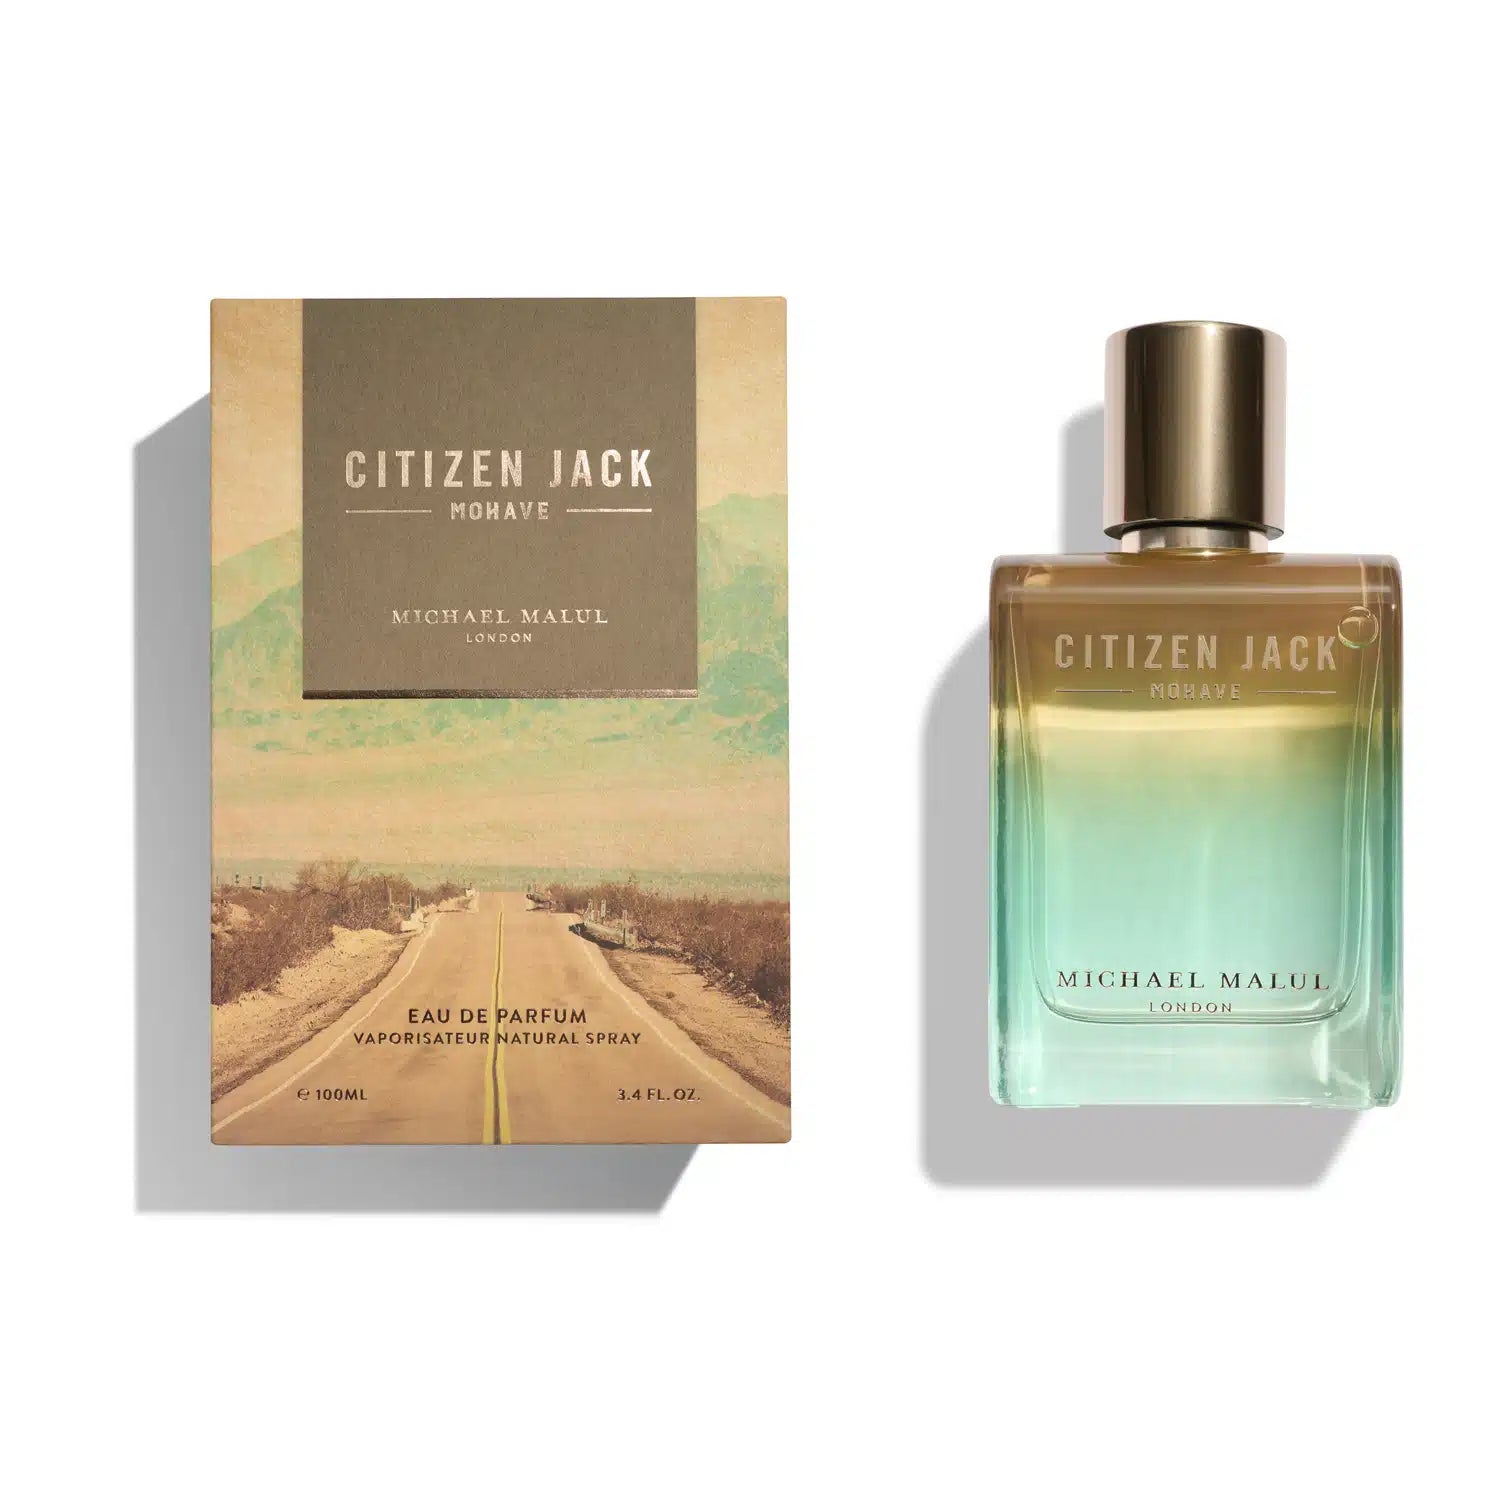 Citizen Jack Mohave edp by Michael Malul London